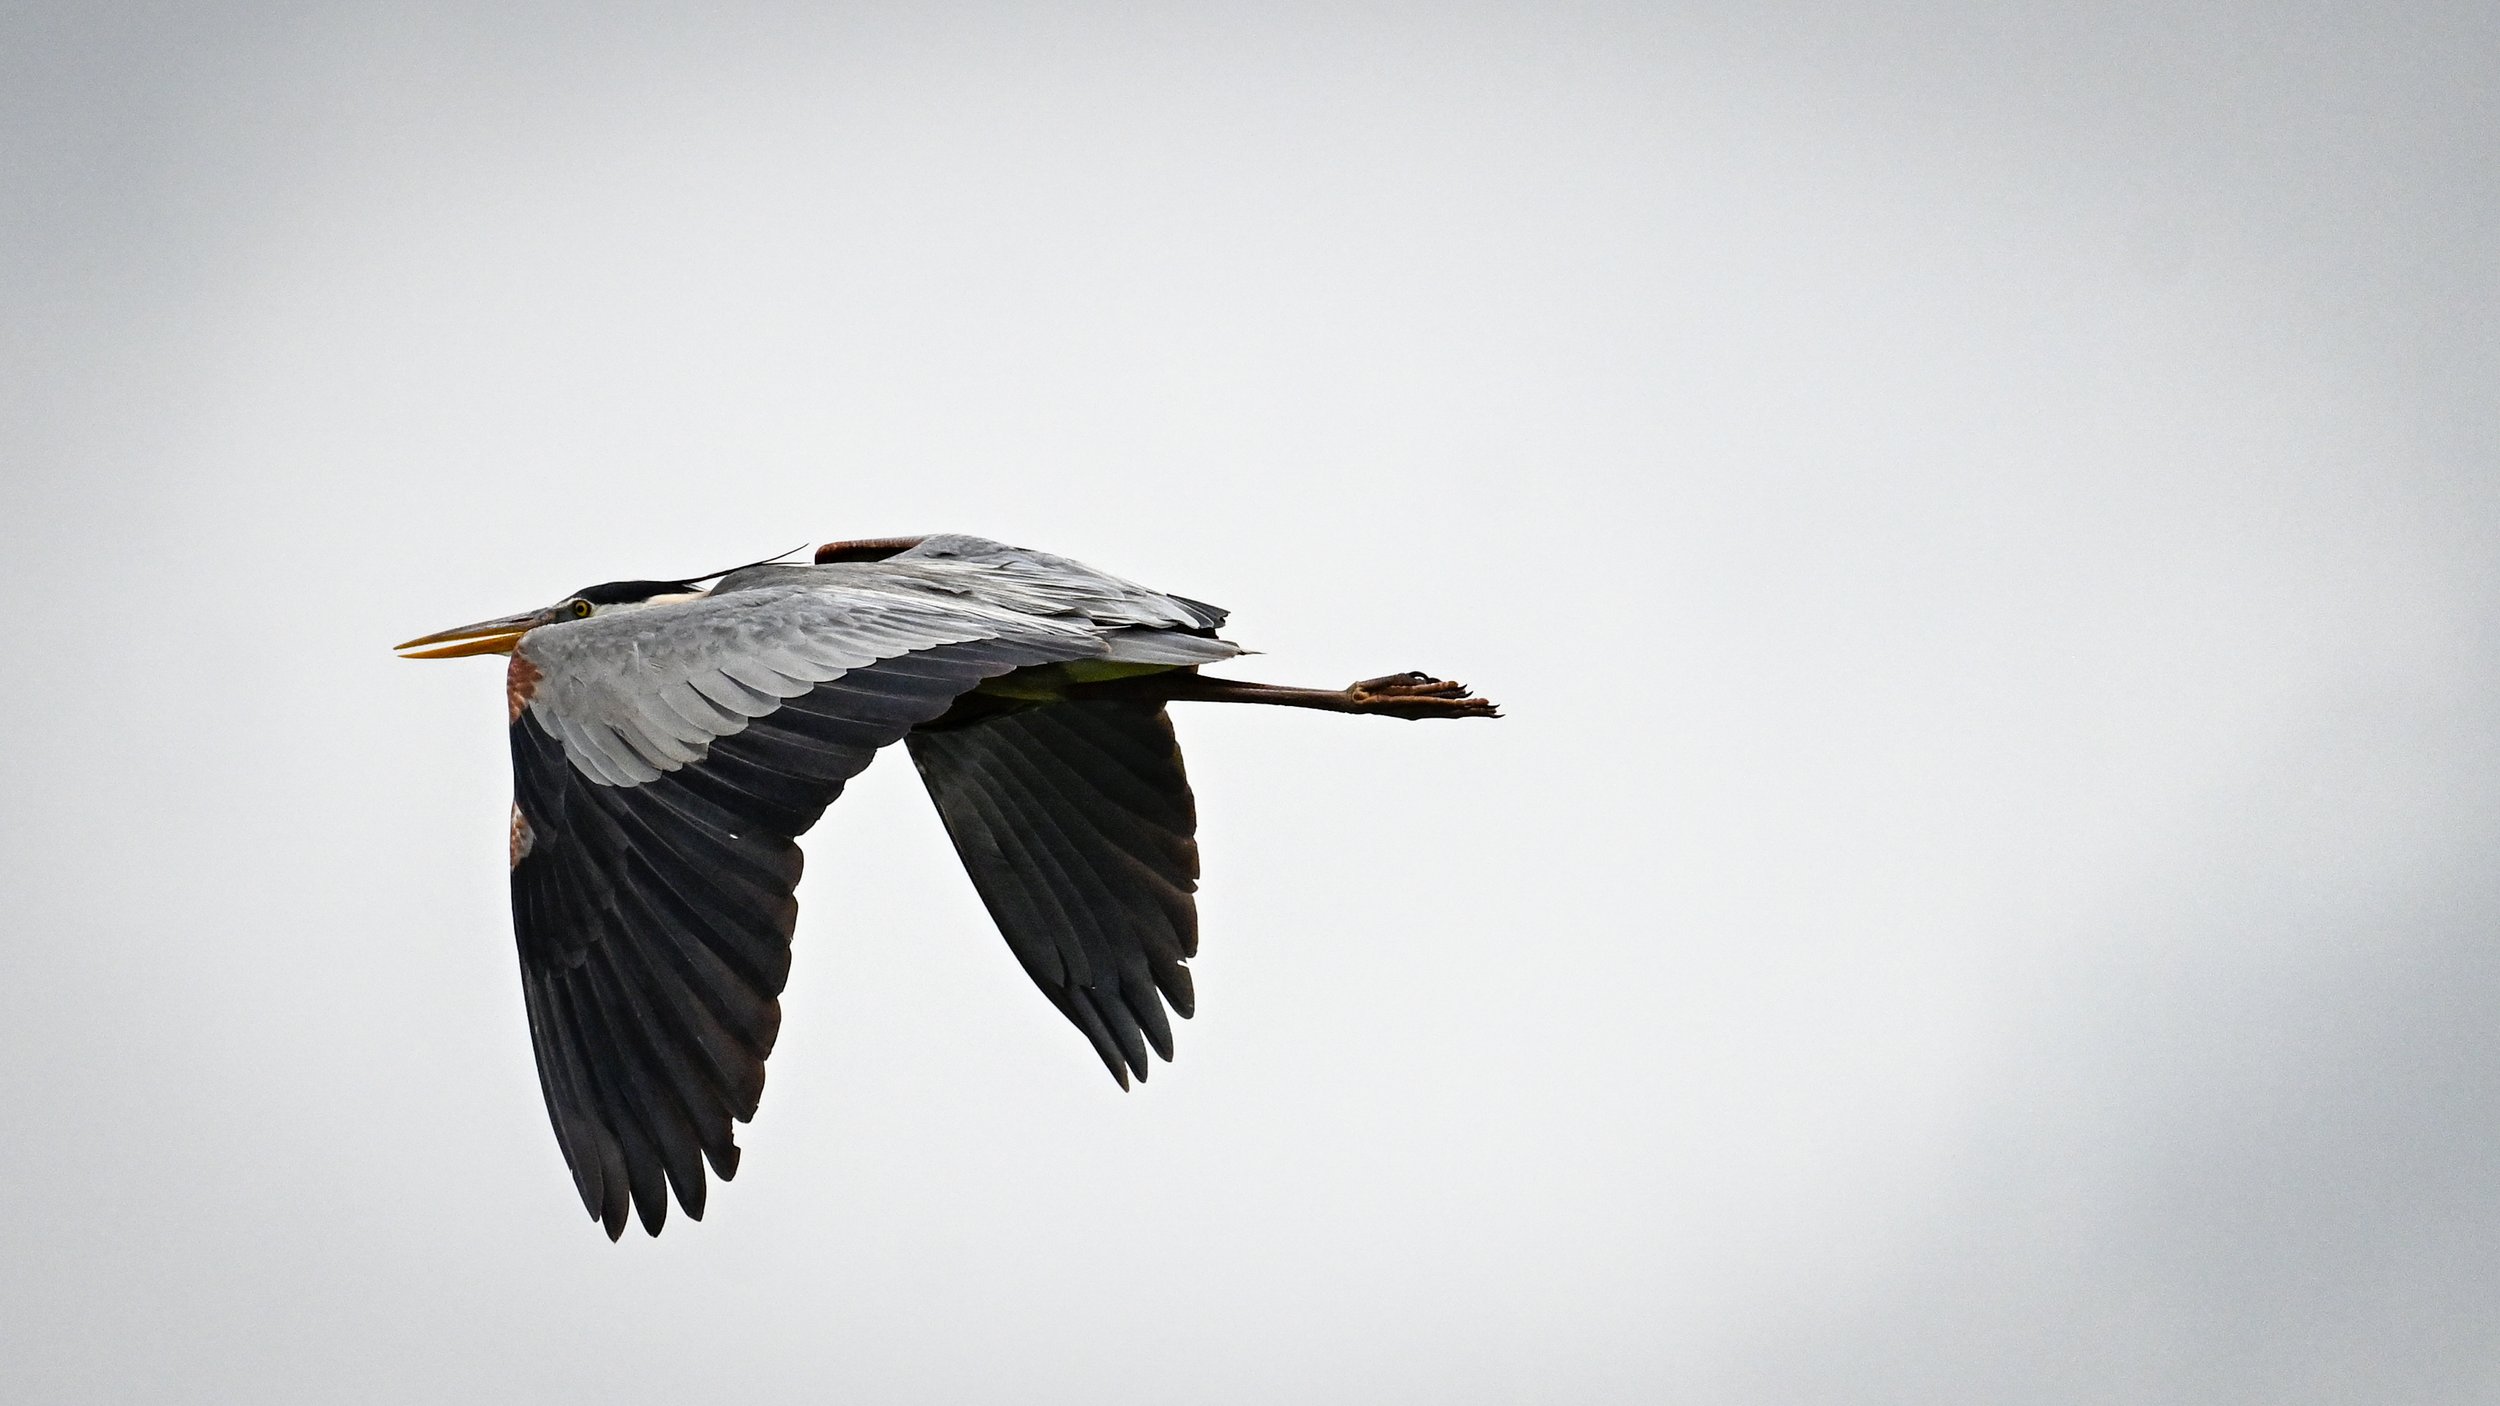 A Great Blue Heron takes off at Scout Pond